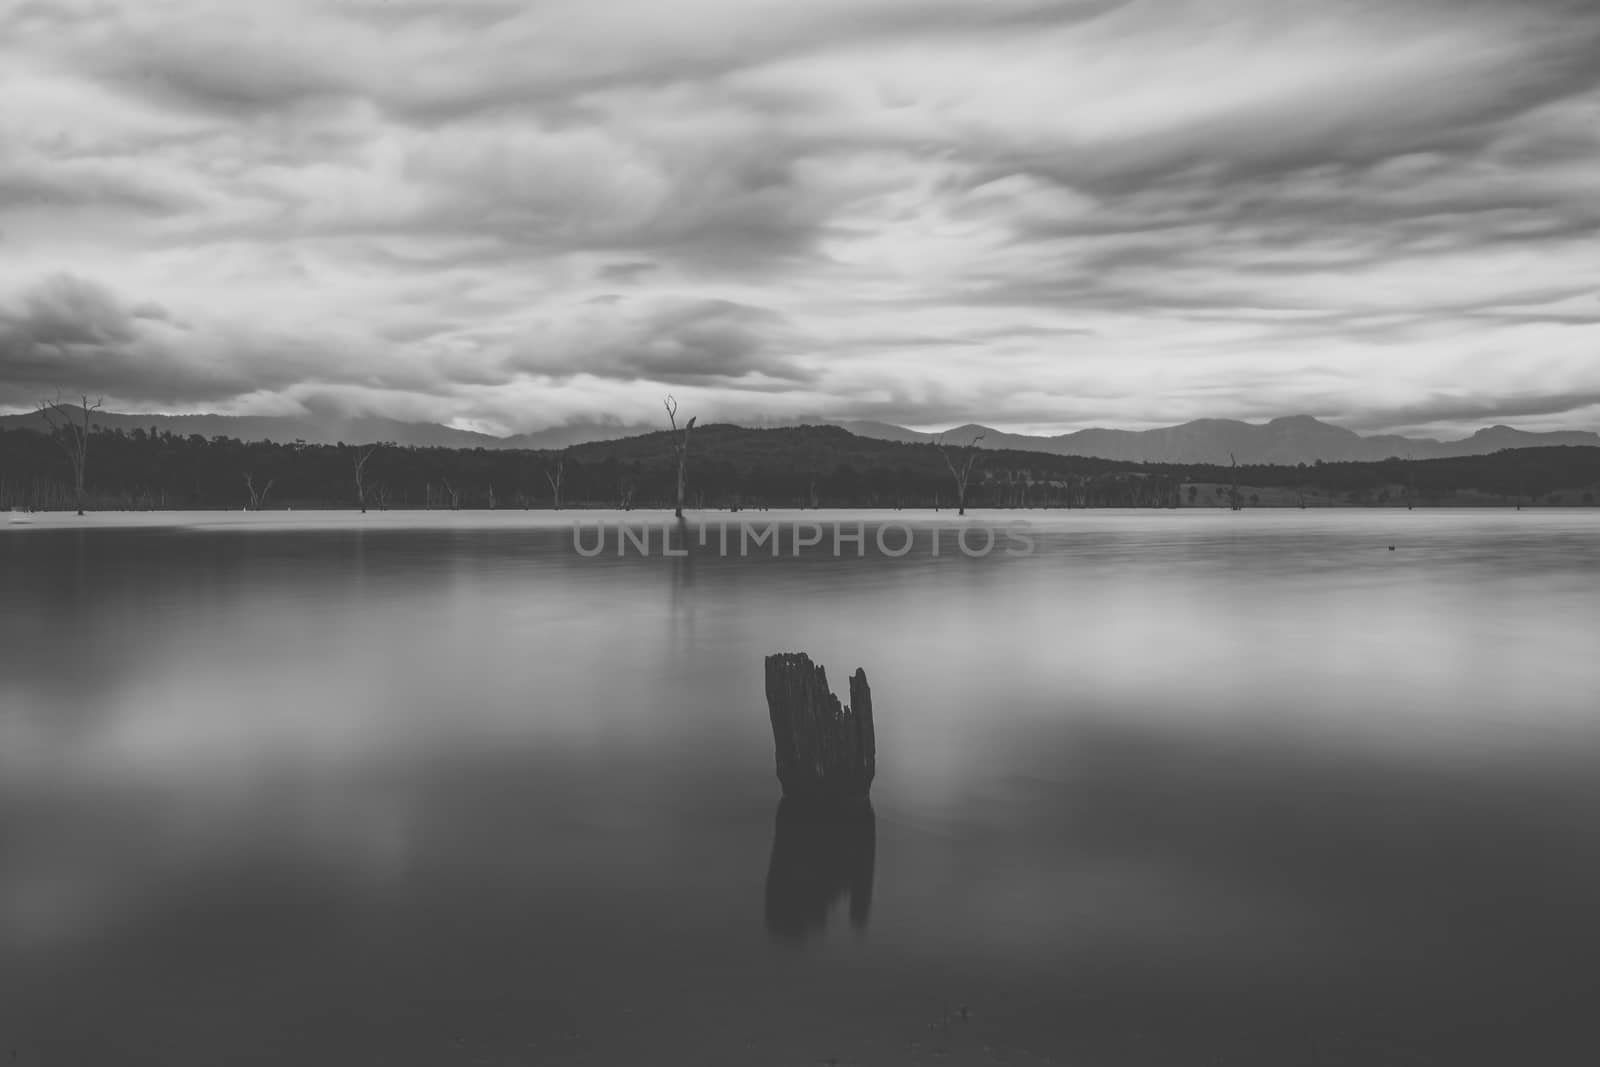 Lake Moogerah in Queensland on a cloudy day